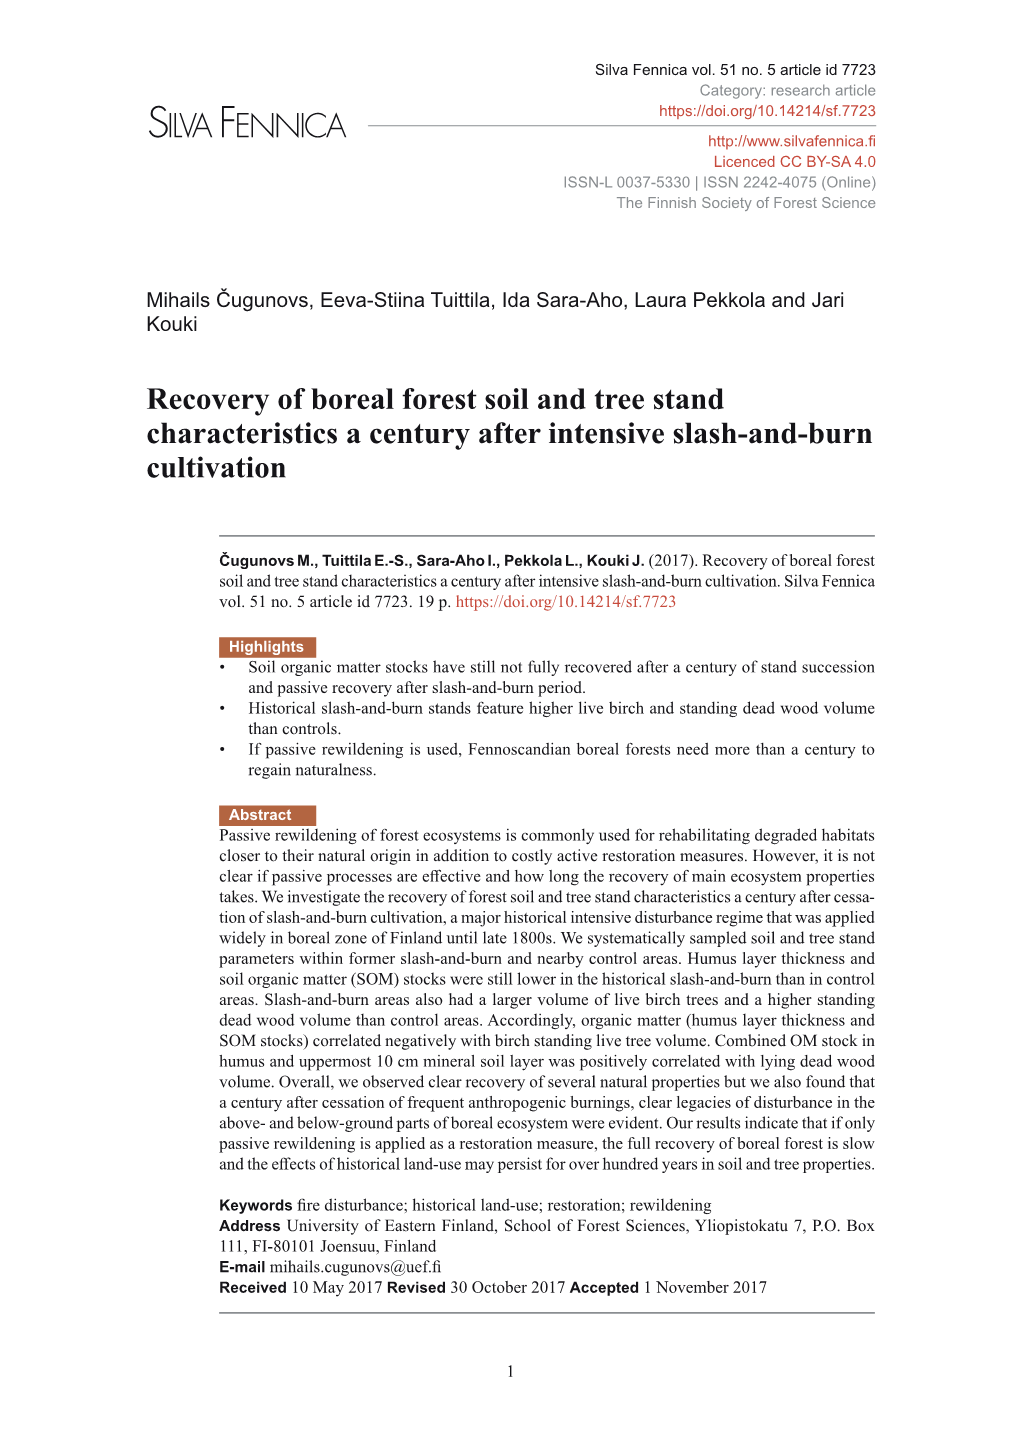 Recovery of Boreal Forest Soil and Tree Stand Characteristics a Century After Intensive Slash-And-Burn Cultivation